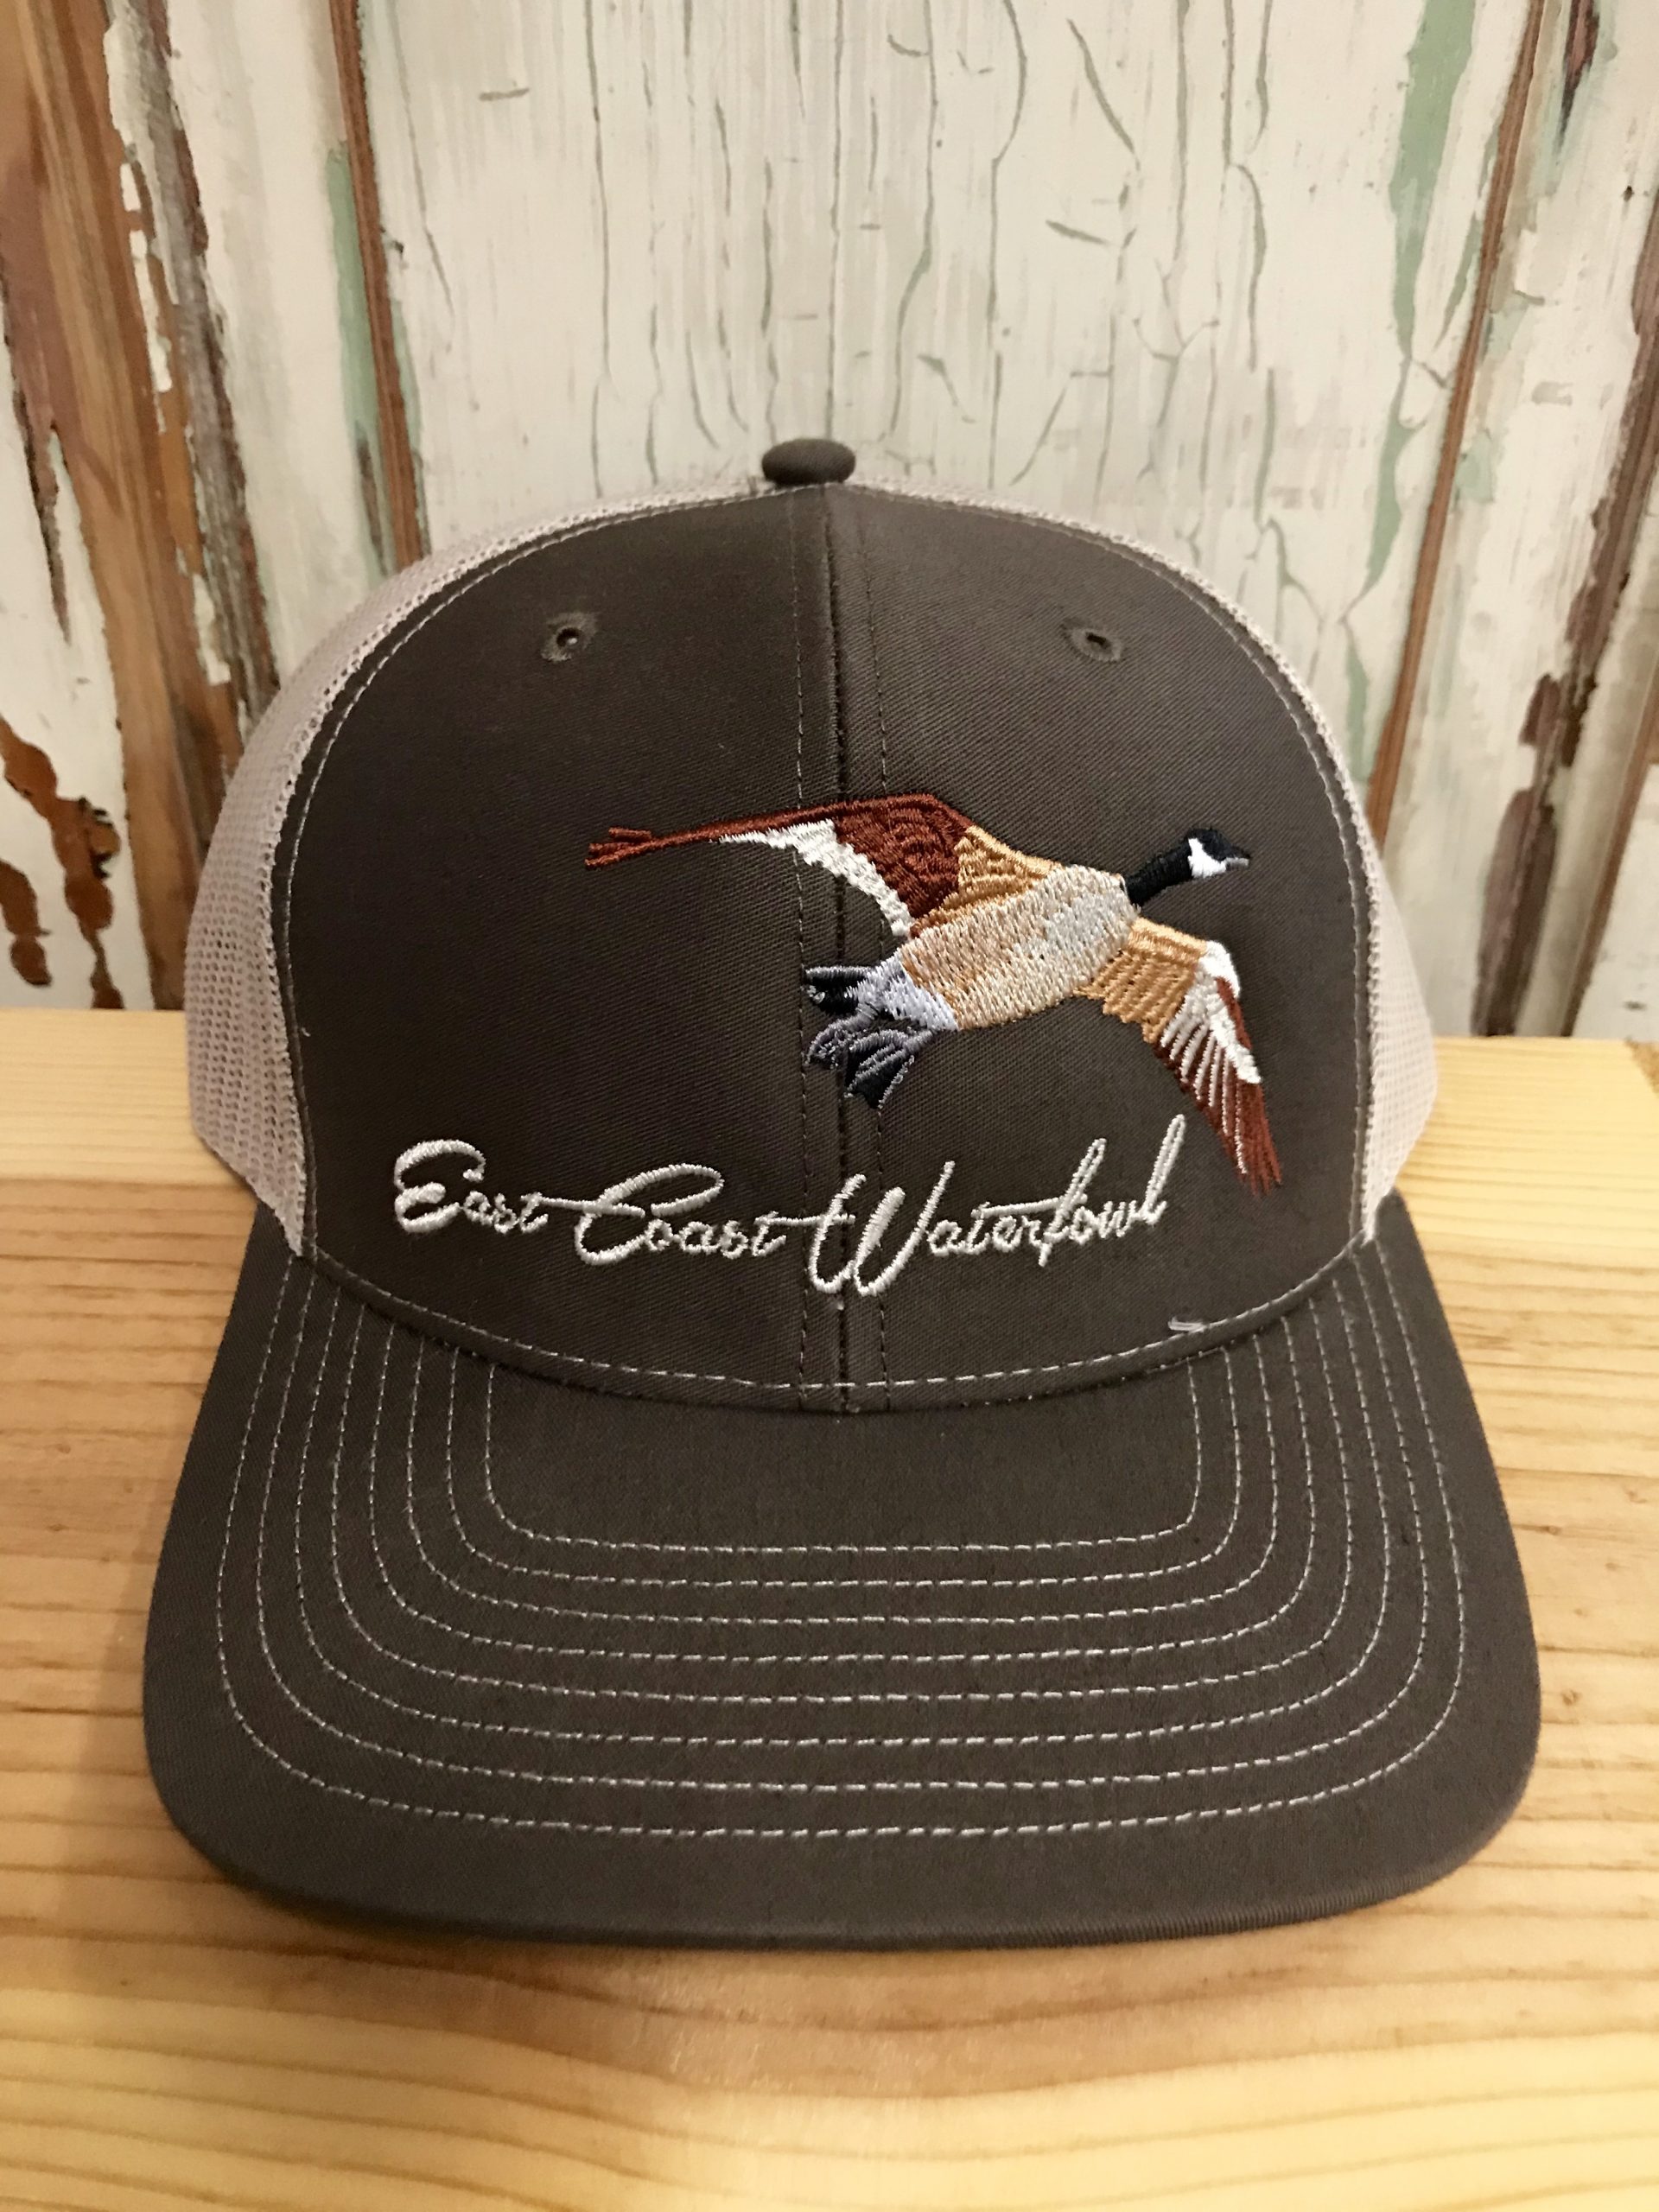 East Coast Waterfowl – Tagged Hat– The County Seat